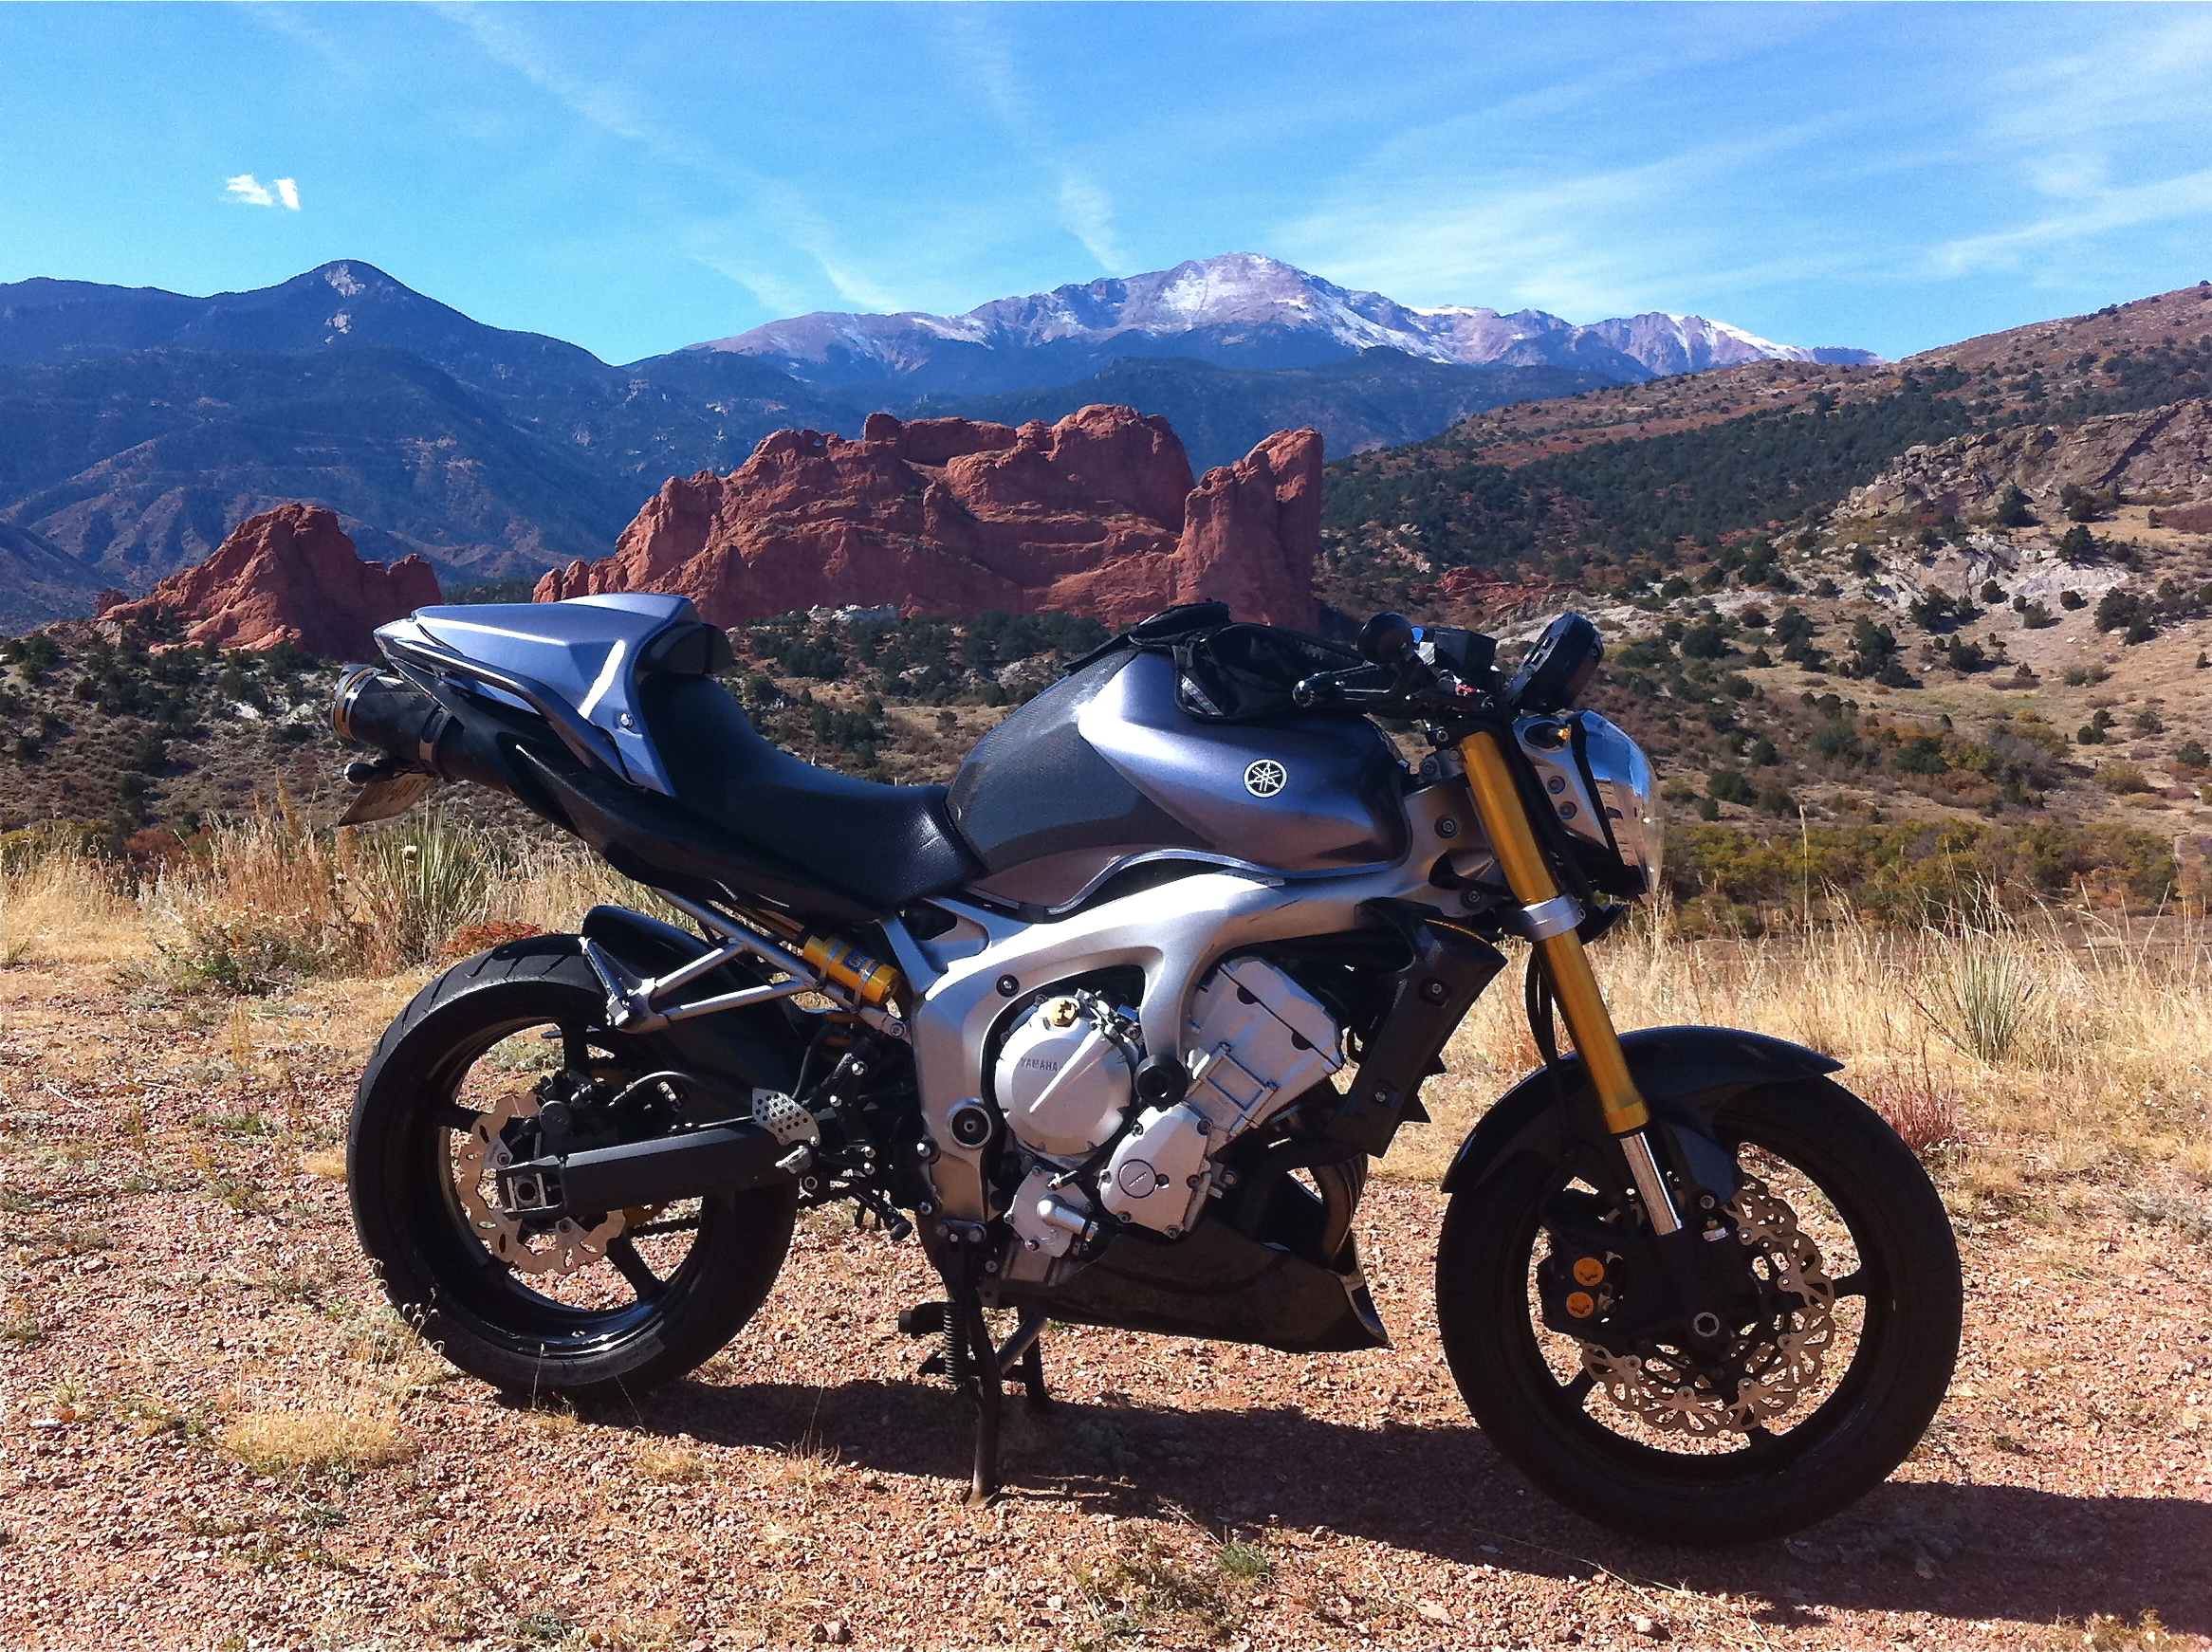 FZ6N and Garden of the Gods and Pikes Peak